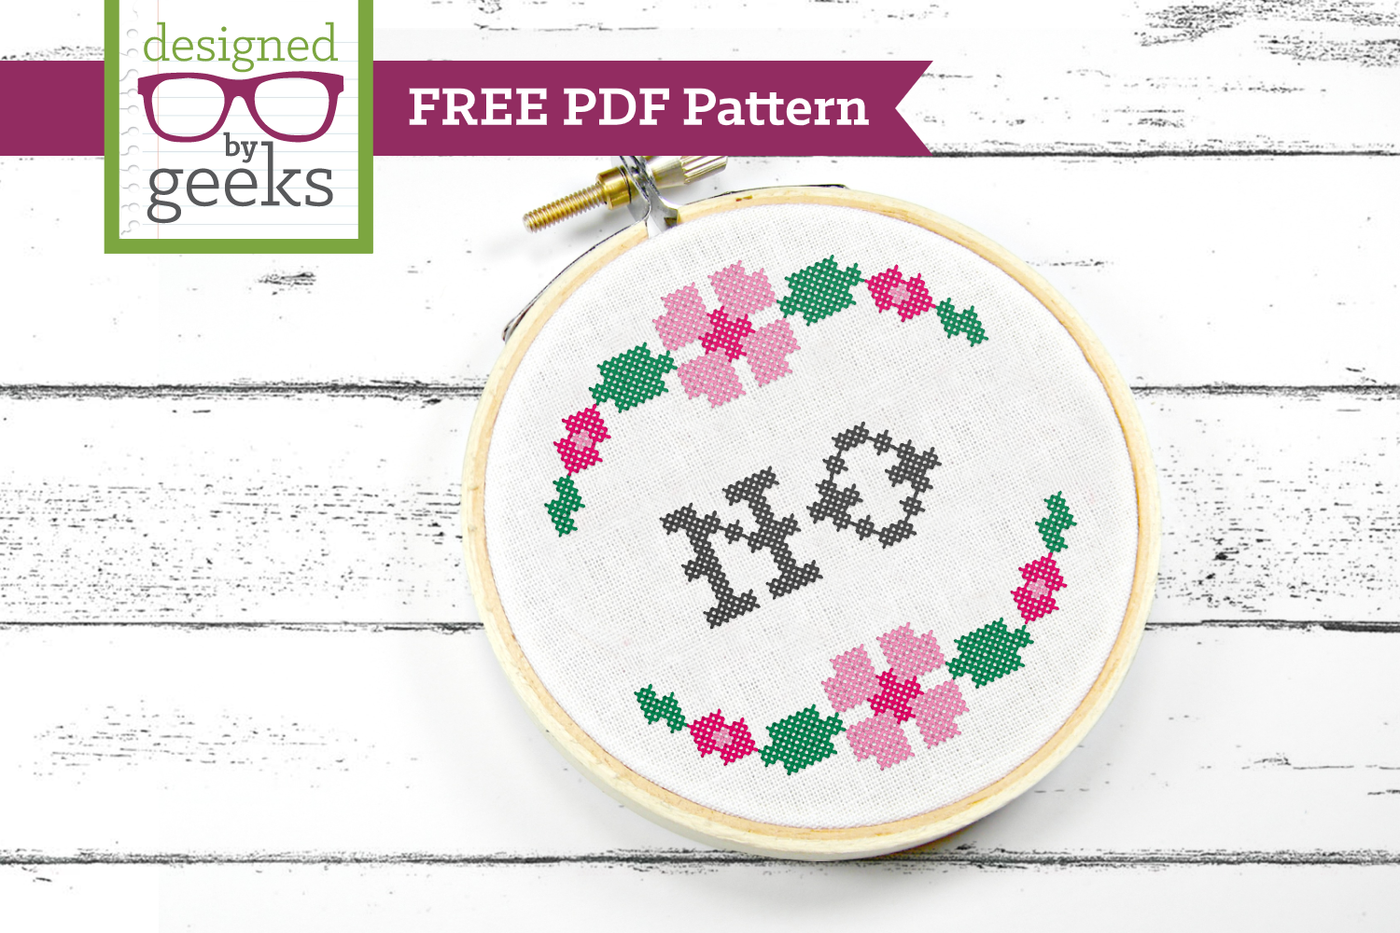 Free PDF cross stitch pattern of a NO with a floral border